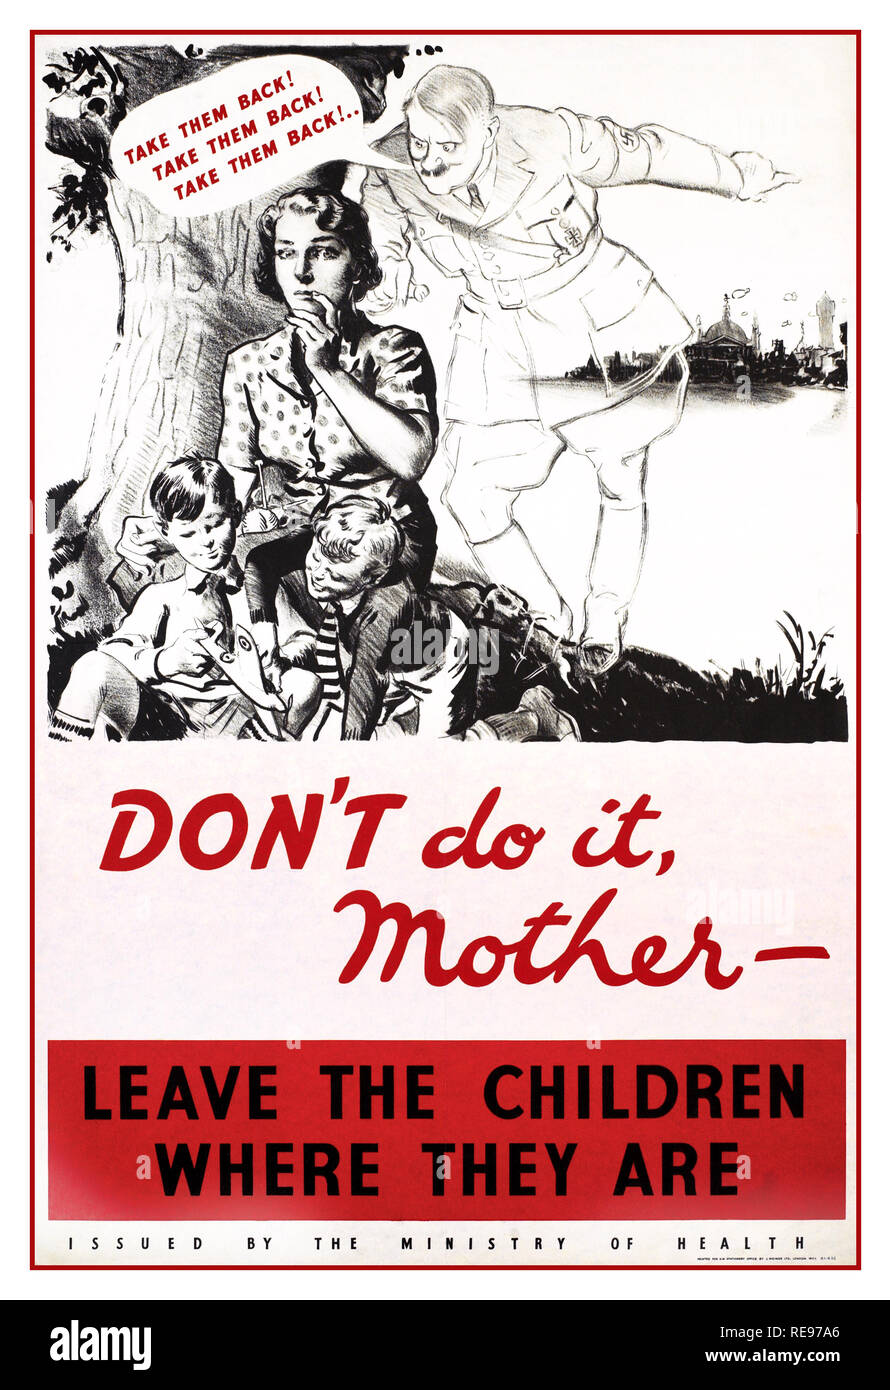 Vintage WW2 Propaganda Poster UK A spectral figure of Adolf Hitler stands behind the woman, trying to persuade her to take her children back to the city. He taps the woman on the shoulder and points towards a view of London in the far right distance, where barrage balloons float over the outlines of St Paul's Cathedral and Big Ben. The woman looks undecided. text: TAKE THEM BACK! TAKE THEM BACK! TAKE THEM BACK!.. DON'T do it, Mother- LEAVE THE CHILDREN WHERE THEY ARE ISSUED BY THE MINISTRY OF HEALTH PRINTED FOR H.M. STATIONERY OFFICE BY J. WEINER LTD., LONDON, W.C.1. c1939-1945 Stock Photo